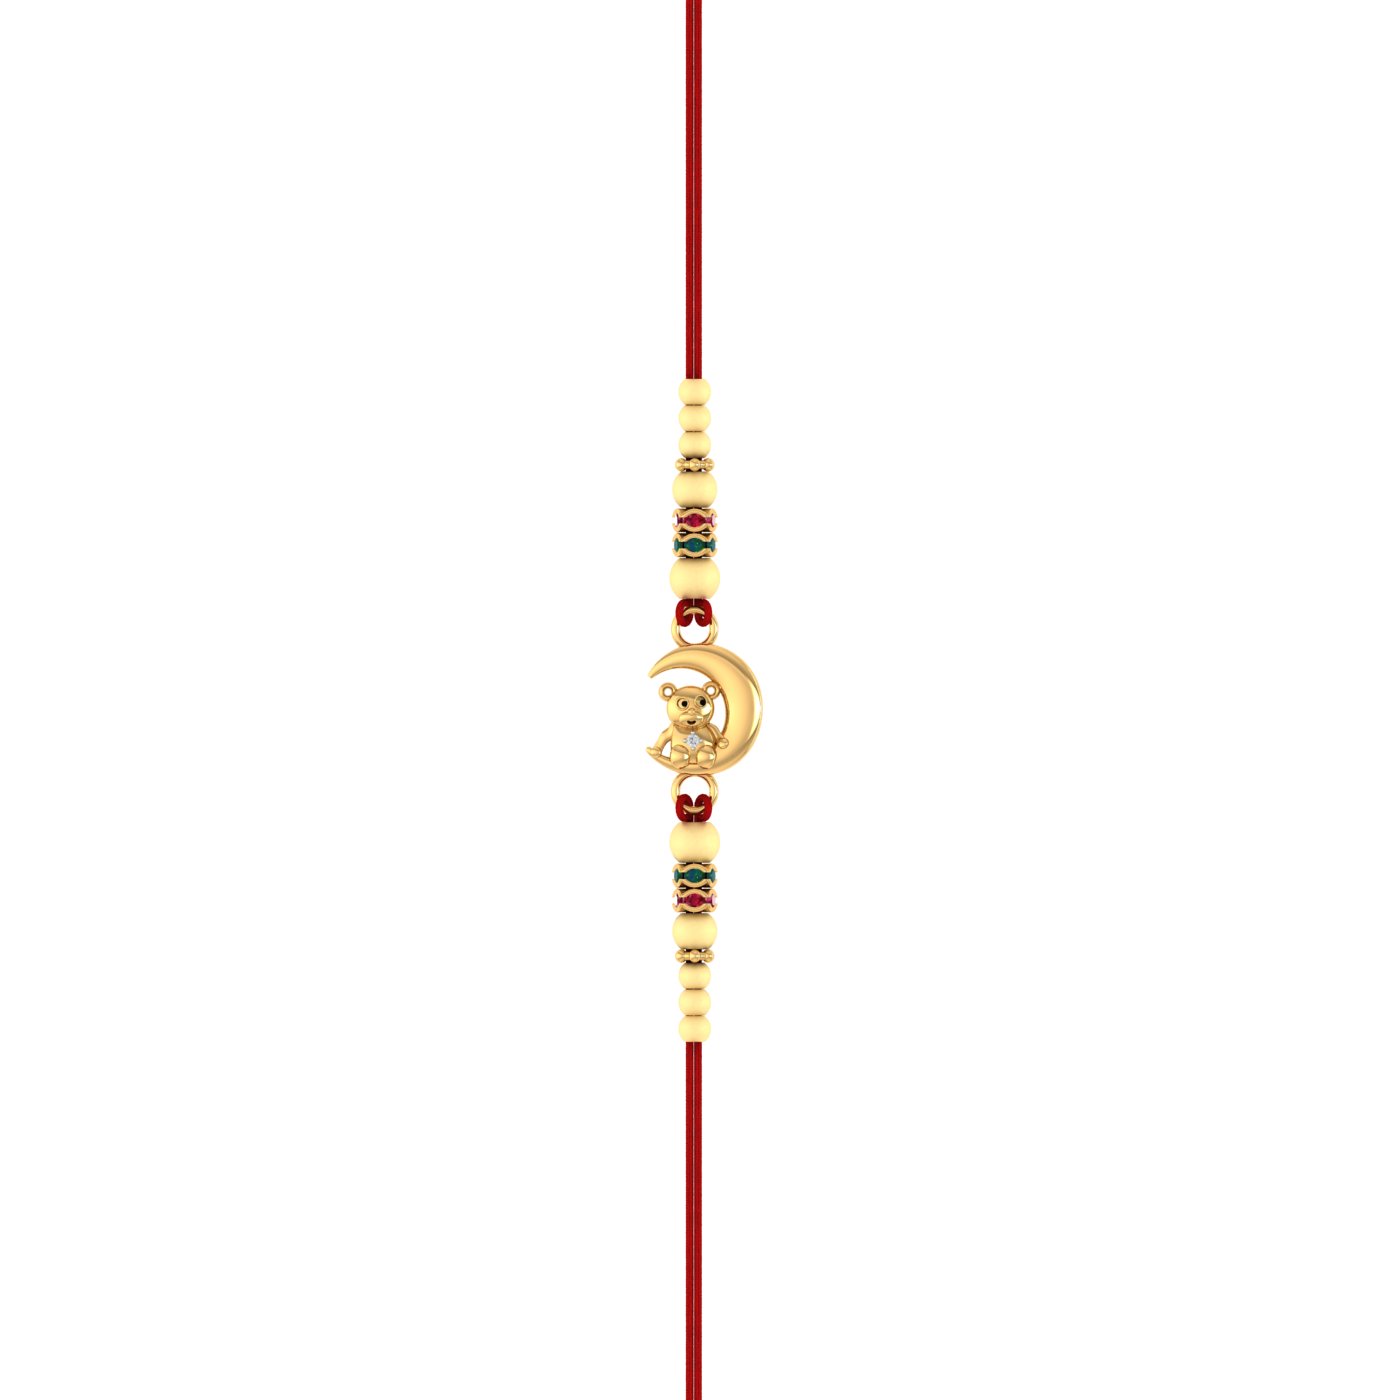 Get Your Hands on the Latest Rakhi Design for Younger Brother | TEDDY BEAR GOLD RAKHI